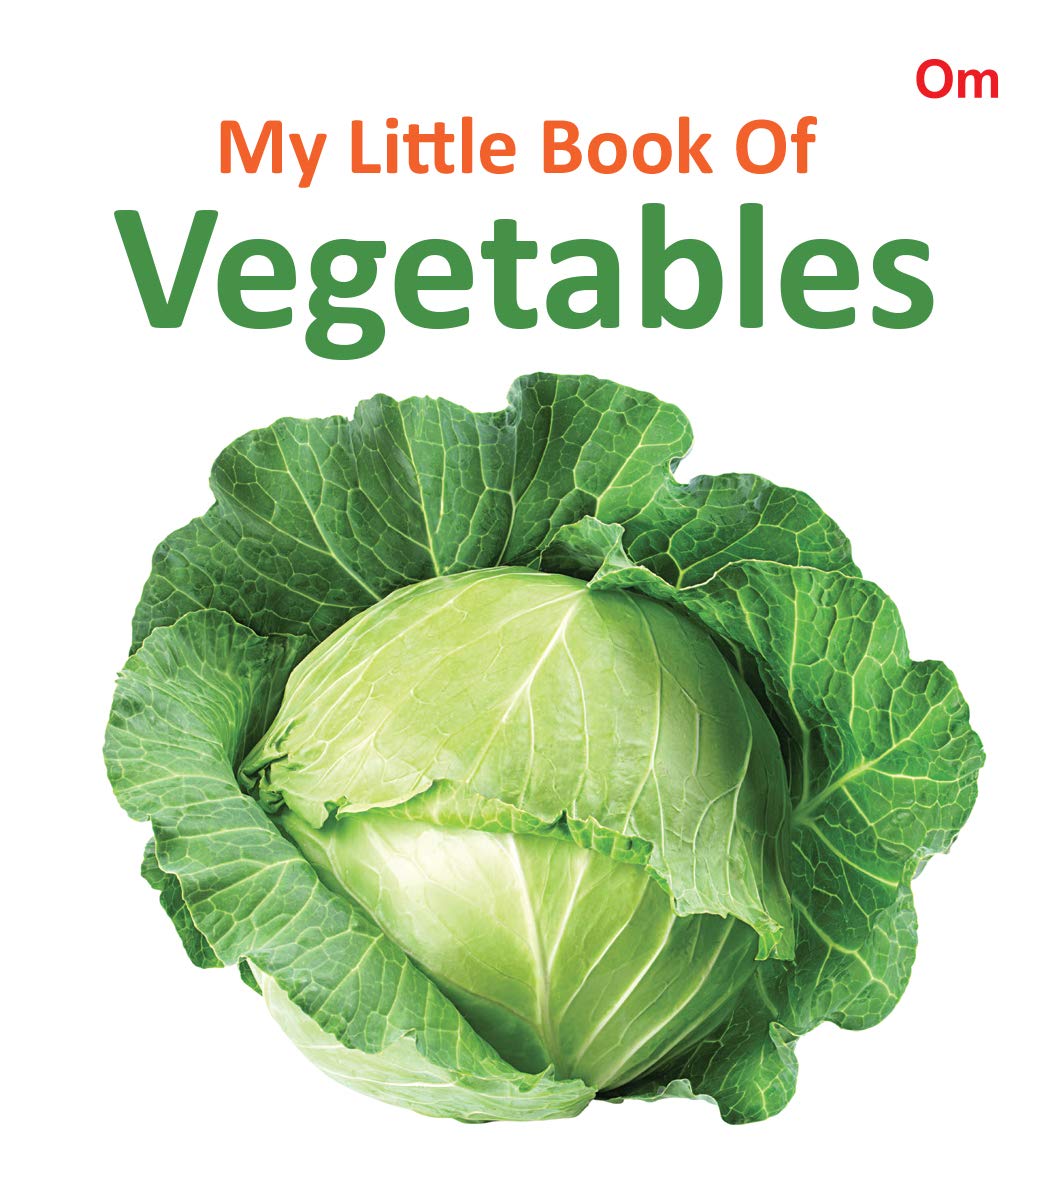 My Little Book Of Vegetables (হার্ডকভার)